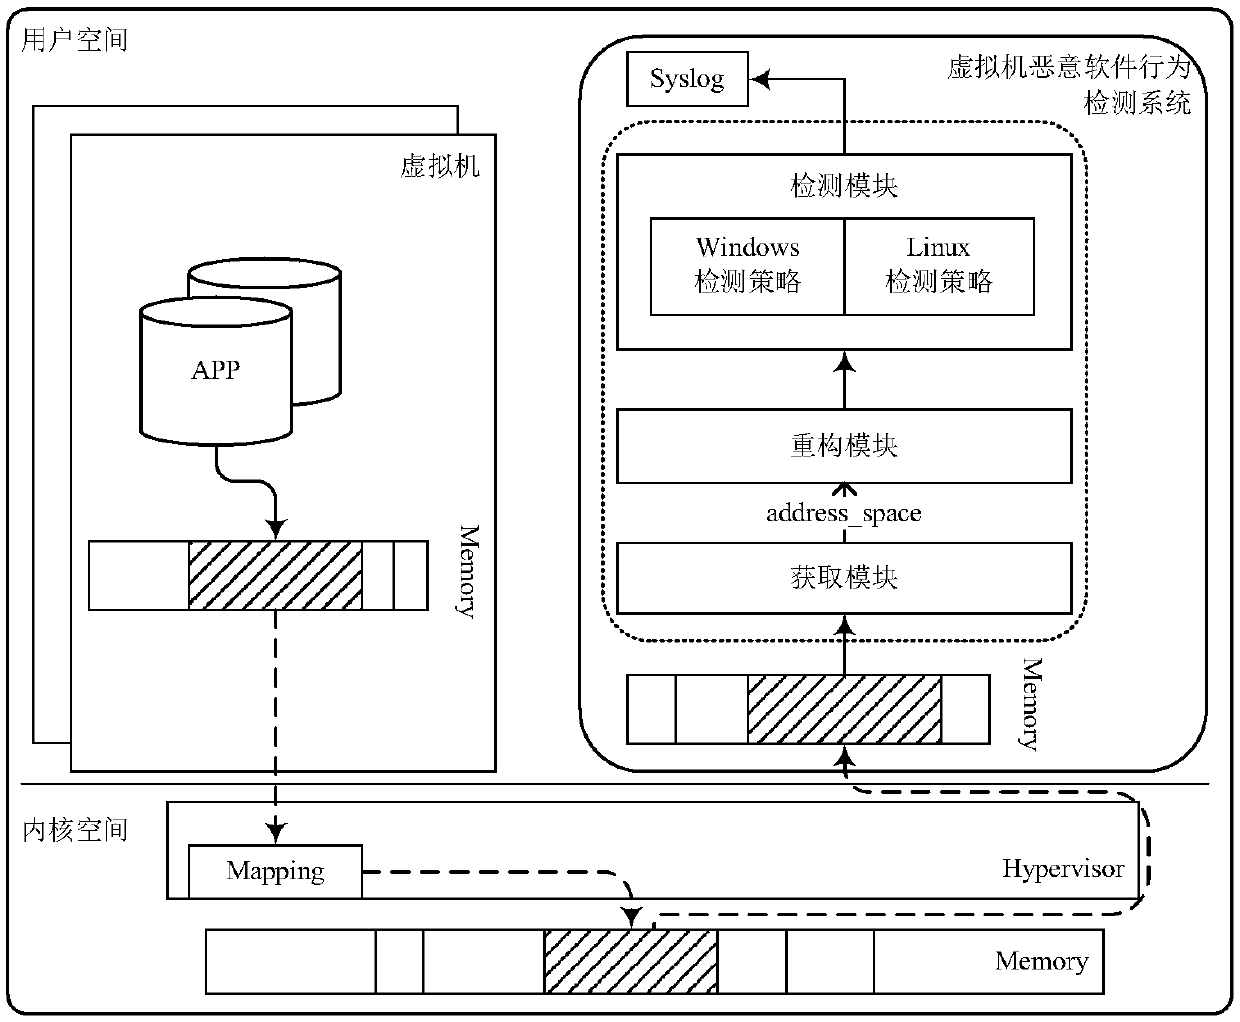 A virtual machine malicious software behavior detection method and system